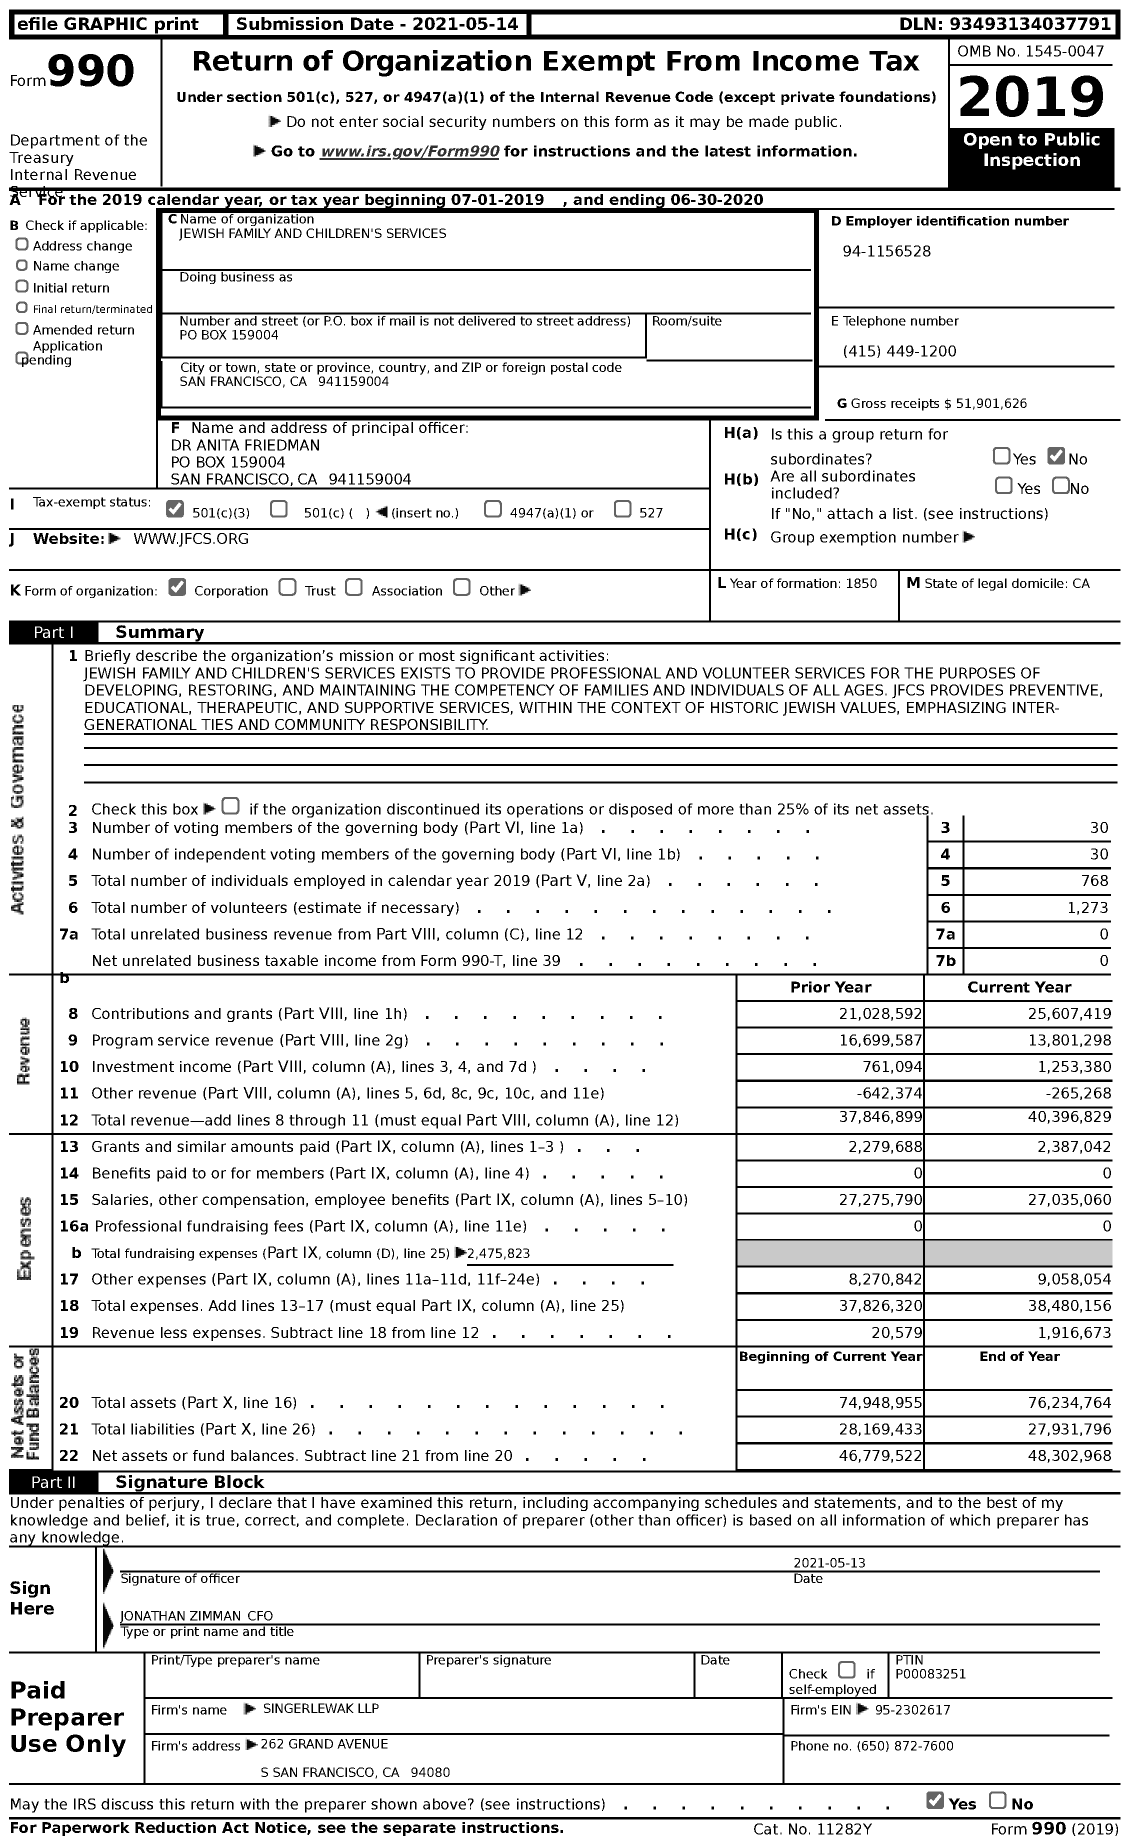 Image of first page of 2019 Form 990 for Jewish Family and Children's Services (JFCS)